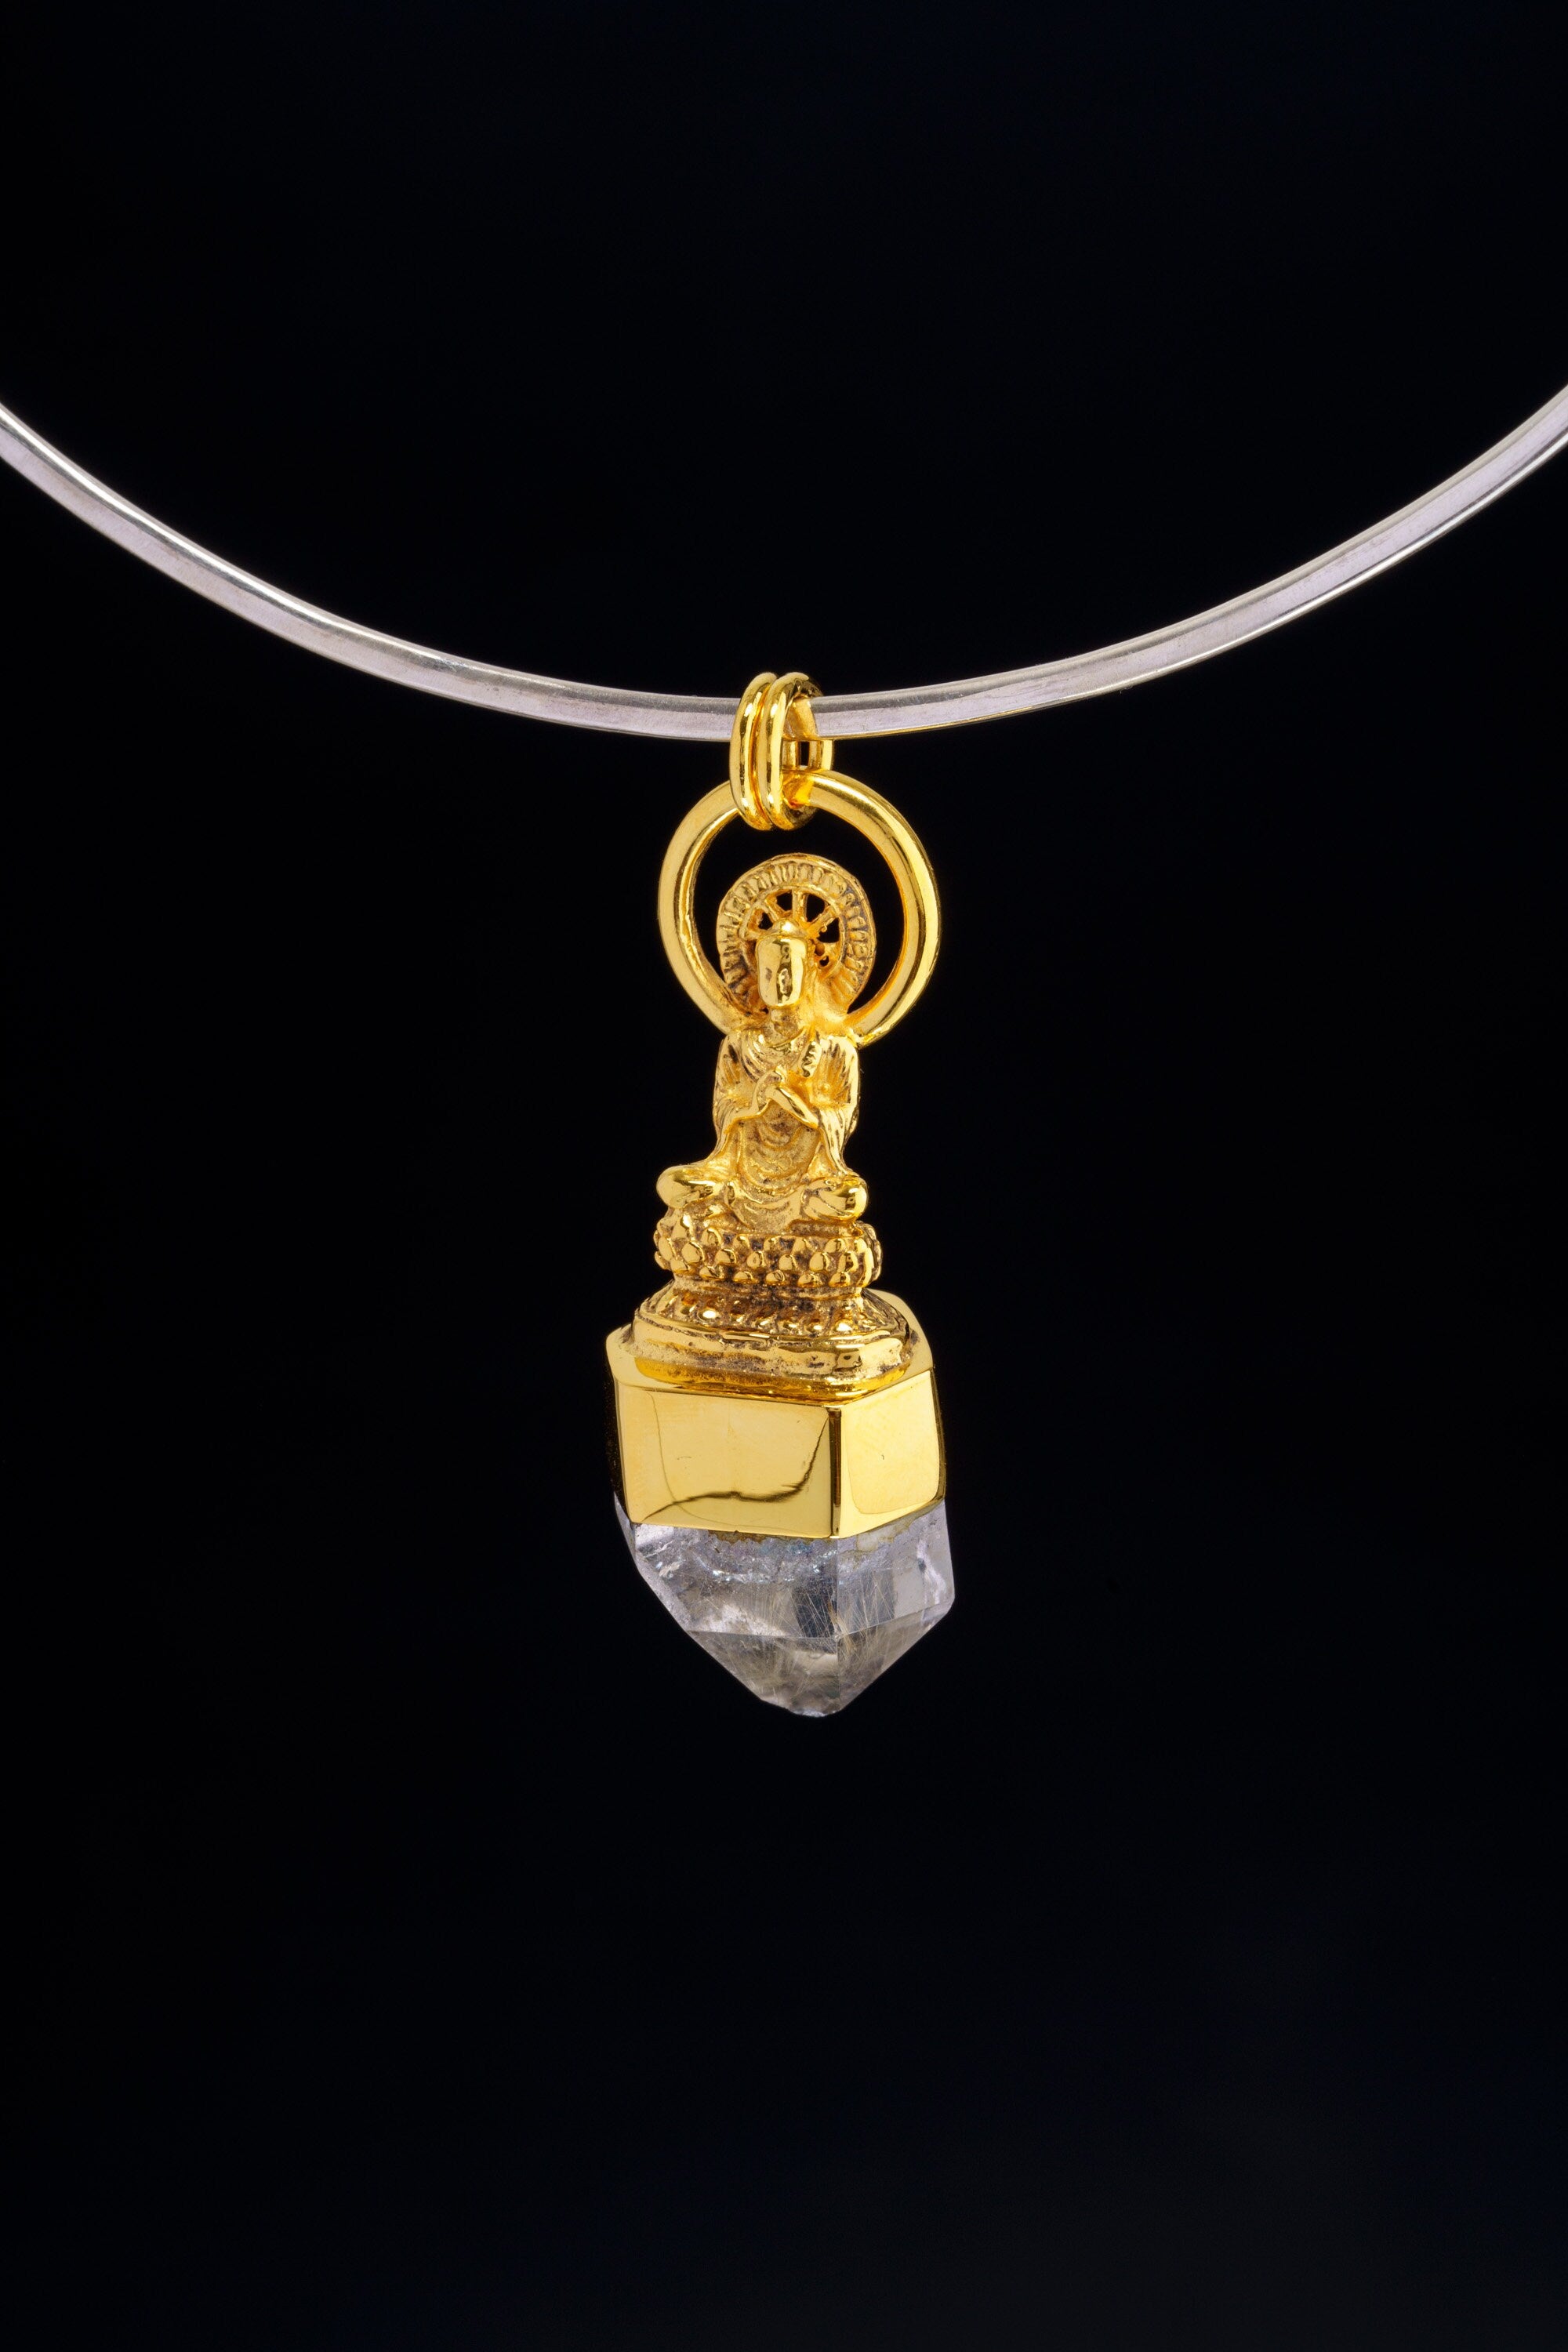 Eclipsing Serenity: The Praying Budha with a Cut Inclusion Golden Rutile Quartz - Gold Plated Sterling Silver Talisman Pendant